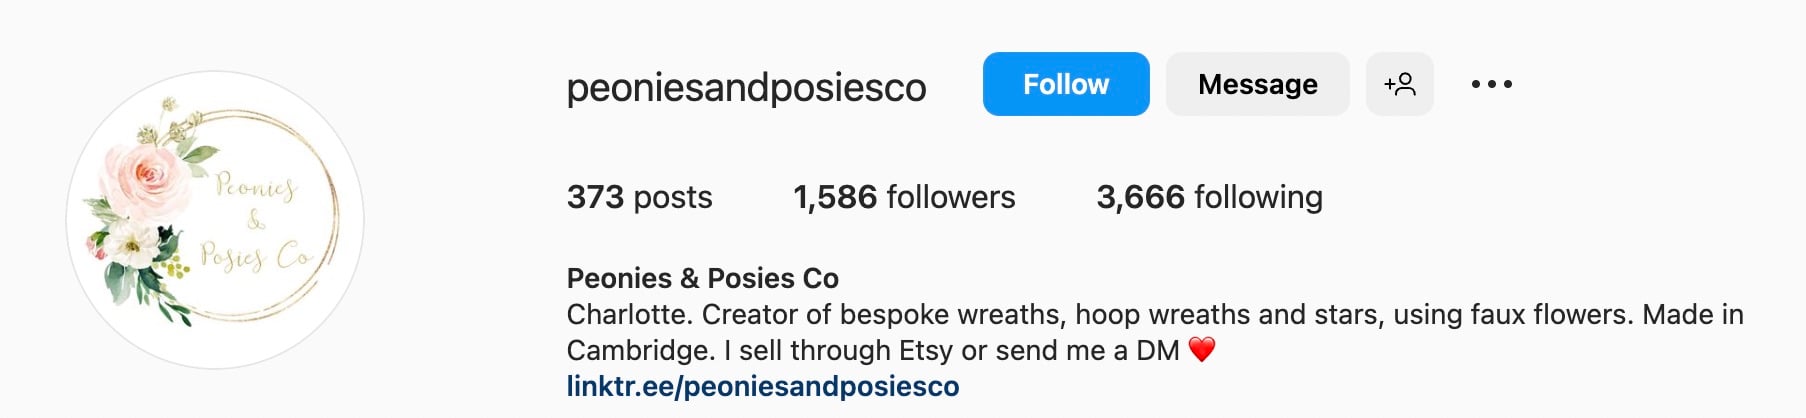 Creative Instagram bio ideas for Etsy shops, peonies and posies